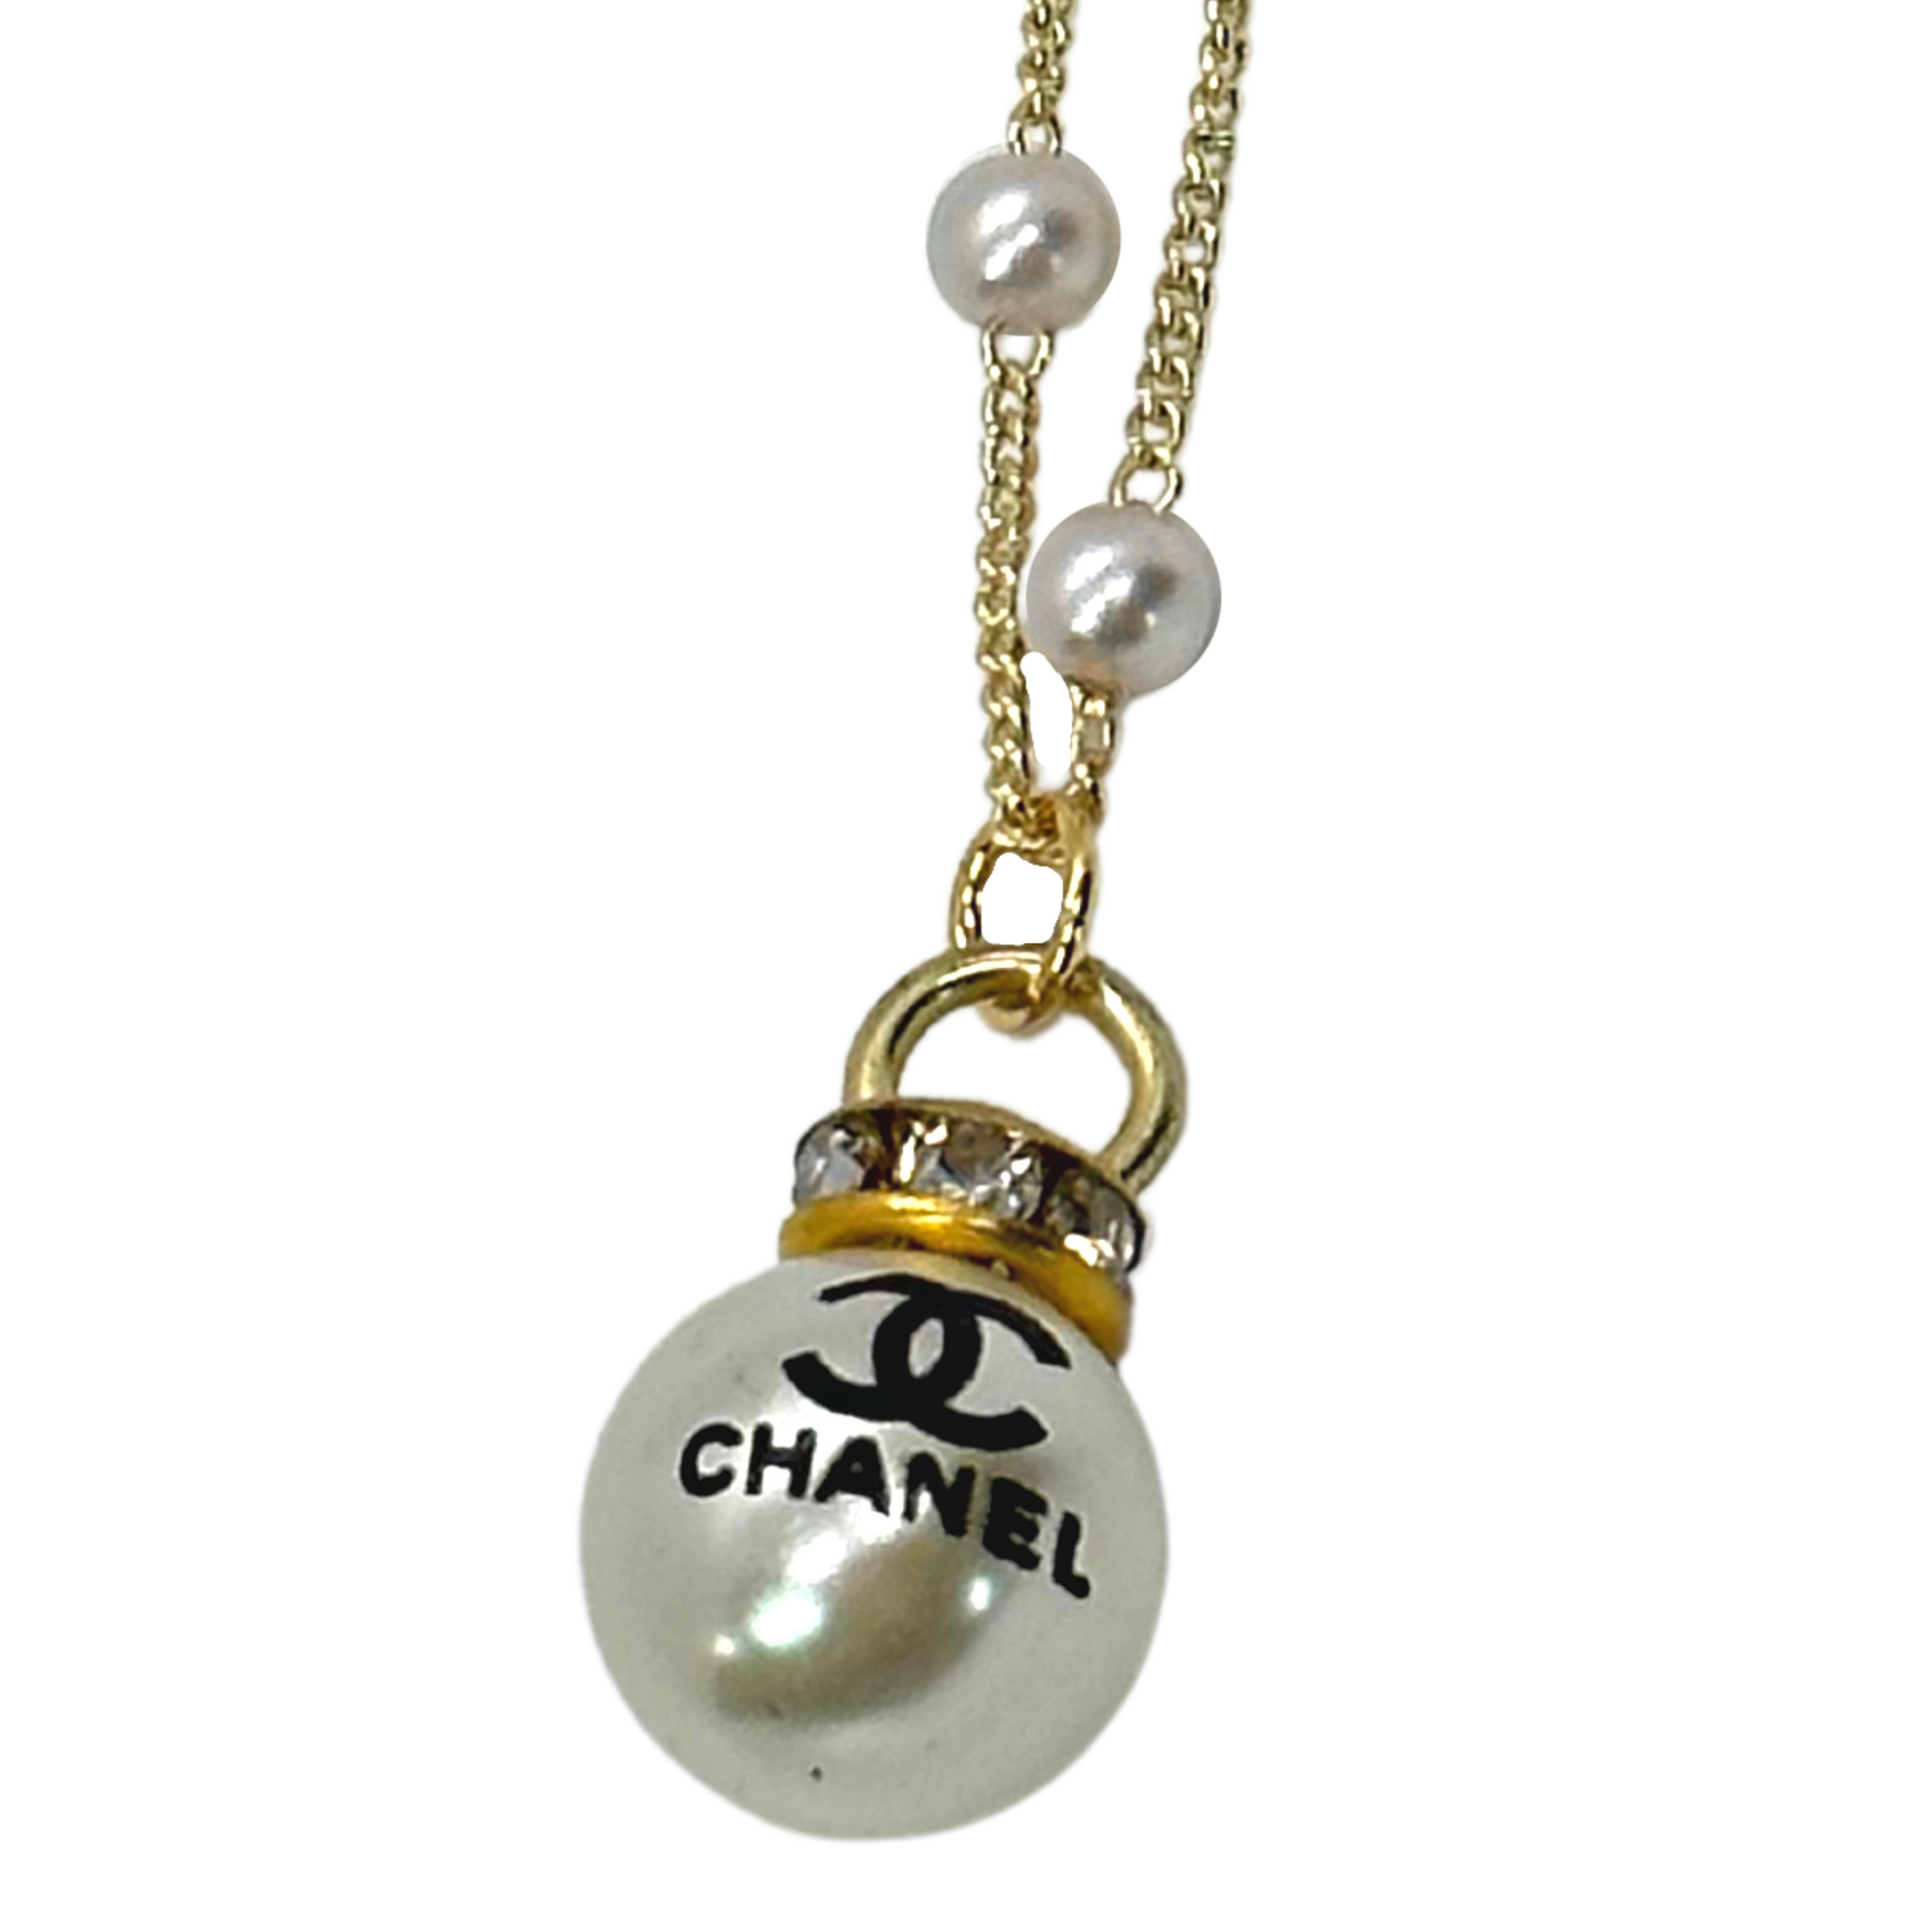 Authentic Chanel Faux Pearl Charm | Reworked Gold 16-18 Necklace